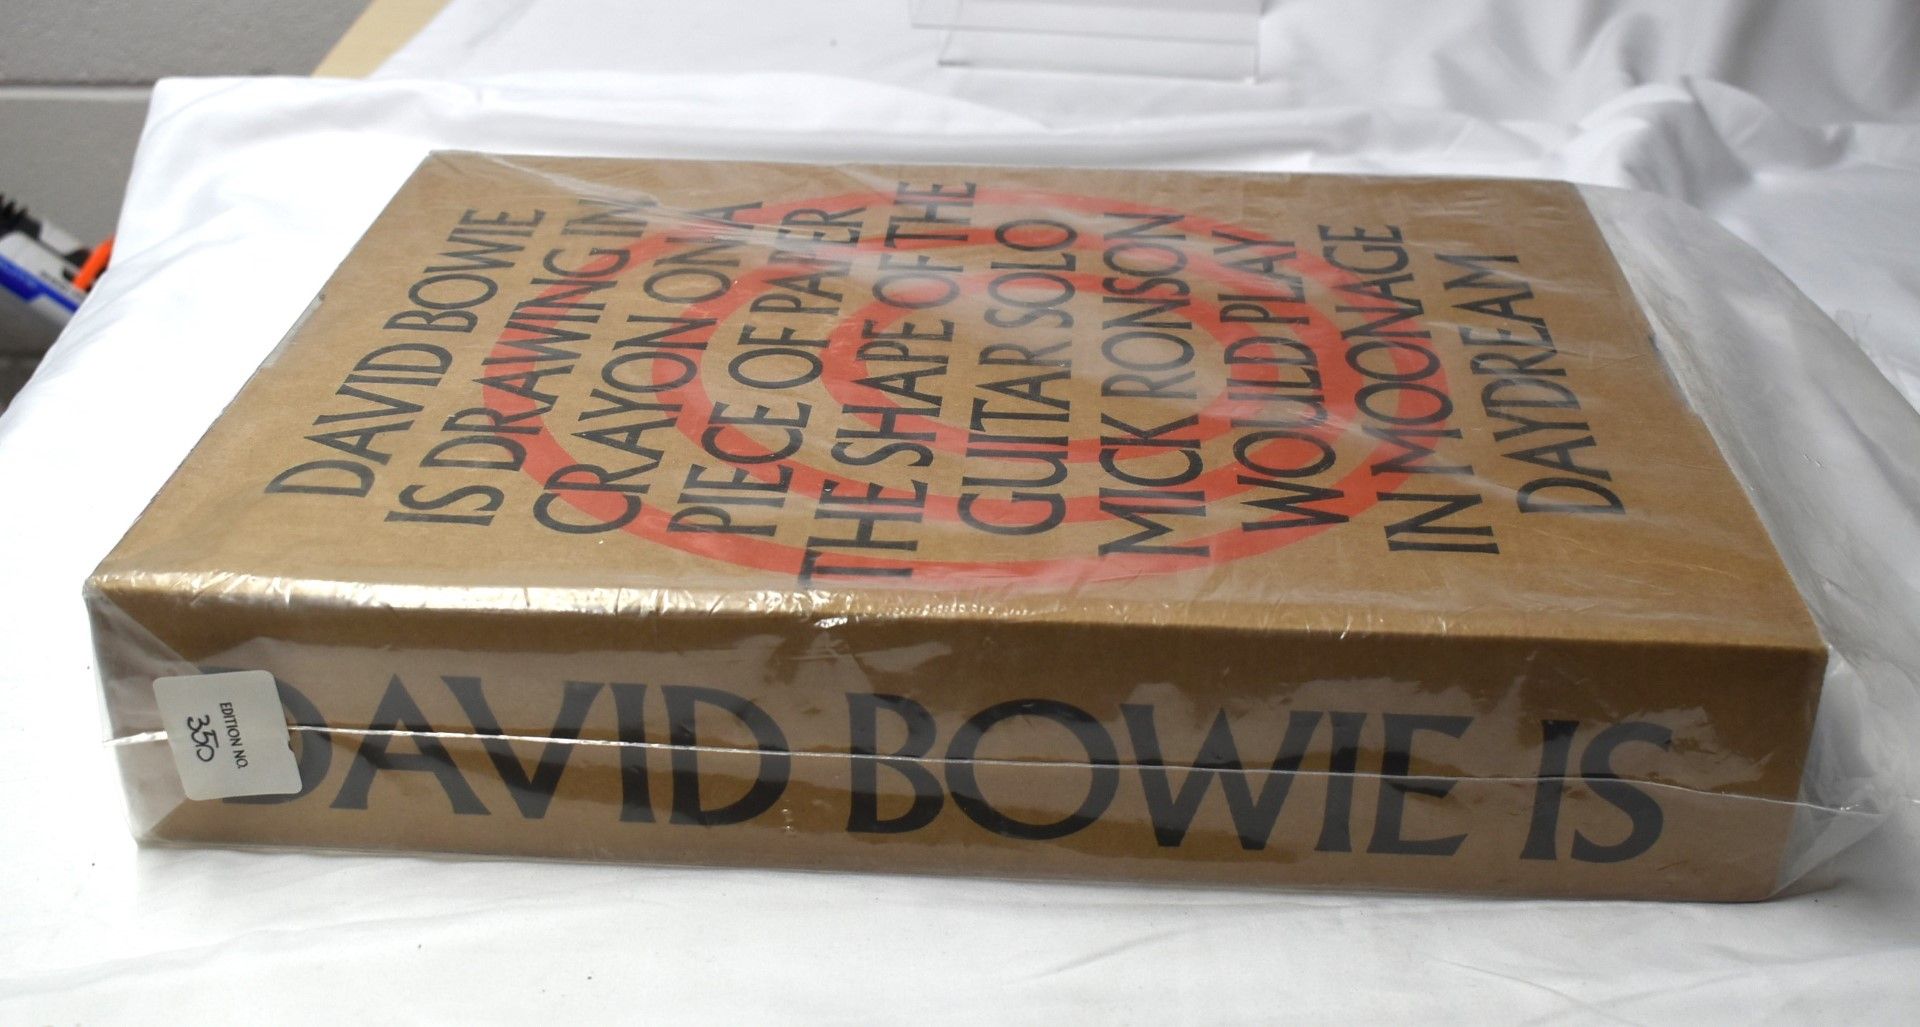 1 x David Bowie IS Personal Portfolio Black Collector's Edition Autographed Book of the V&A - Image 5 of 6